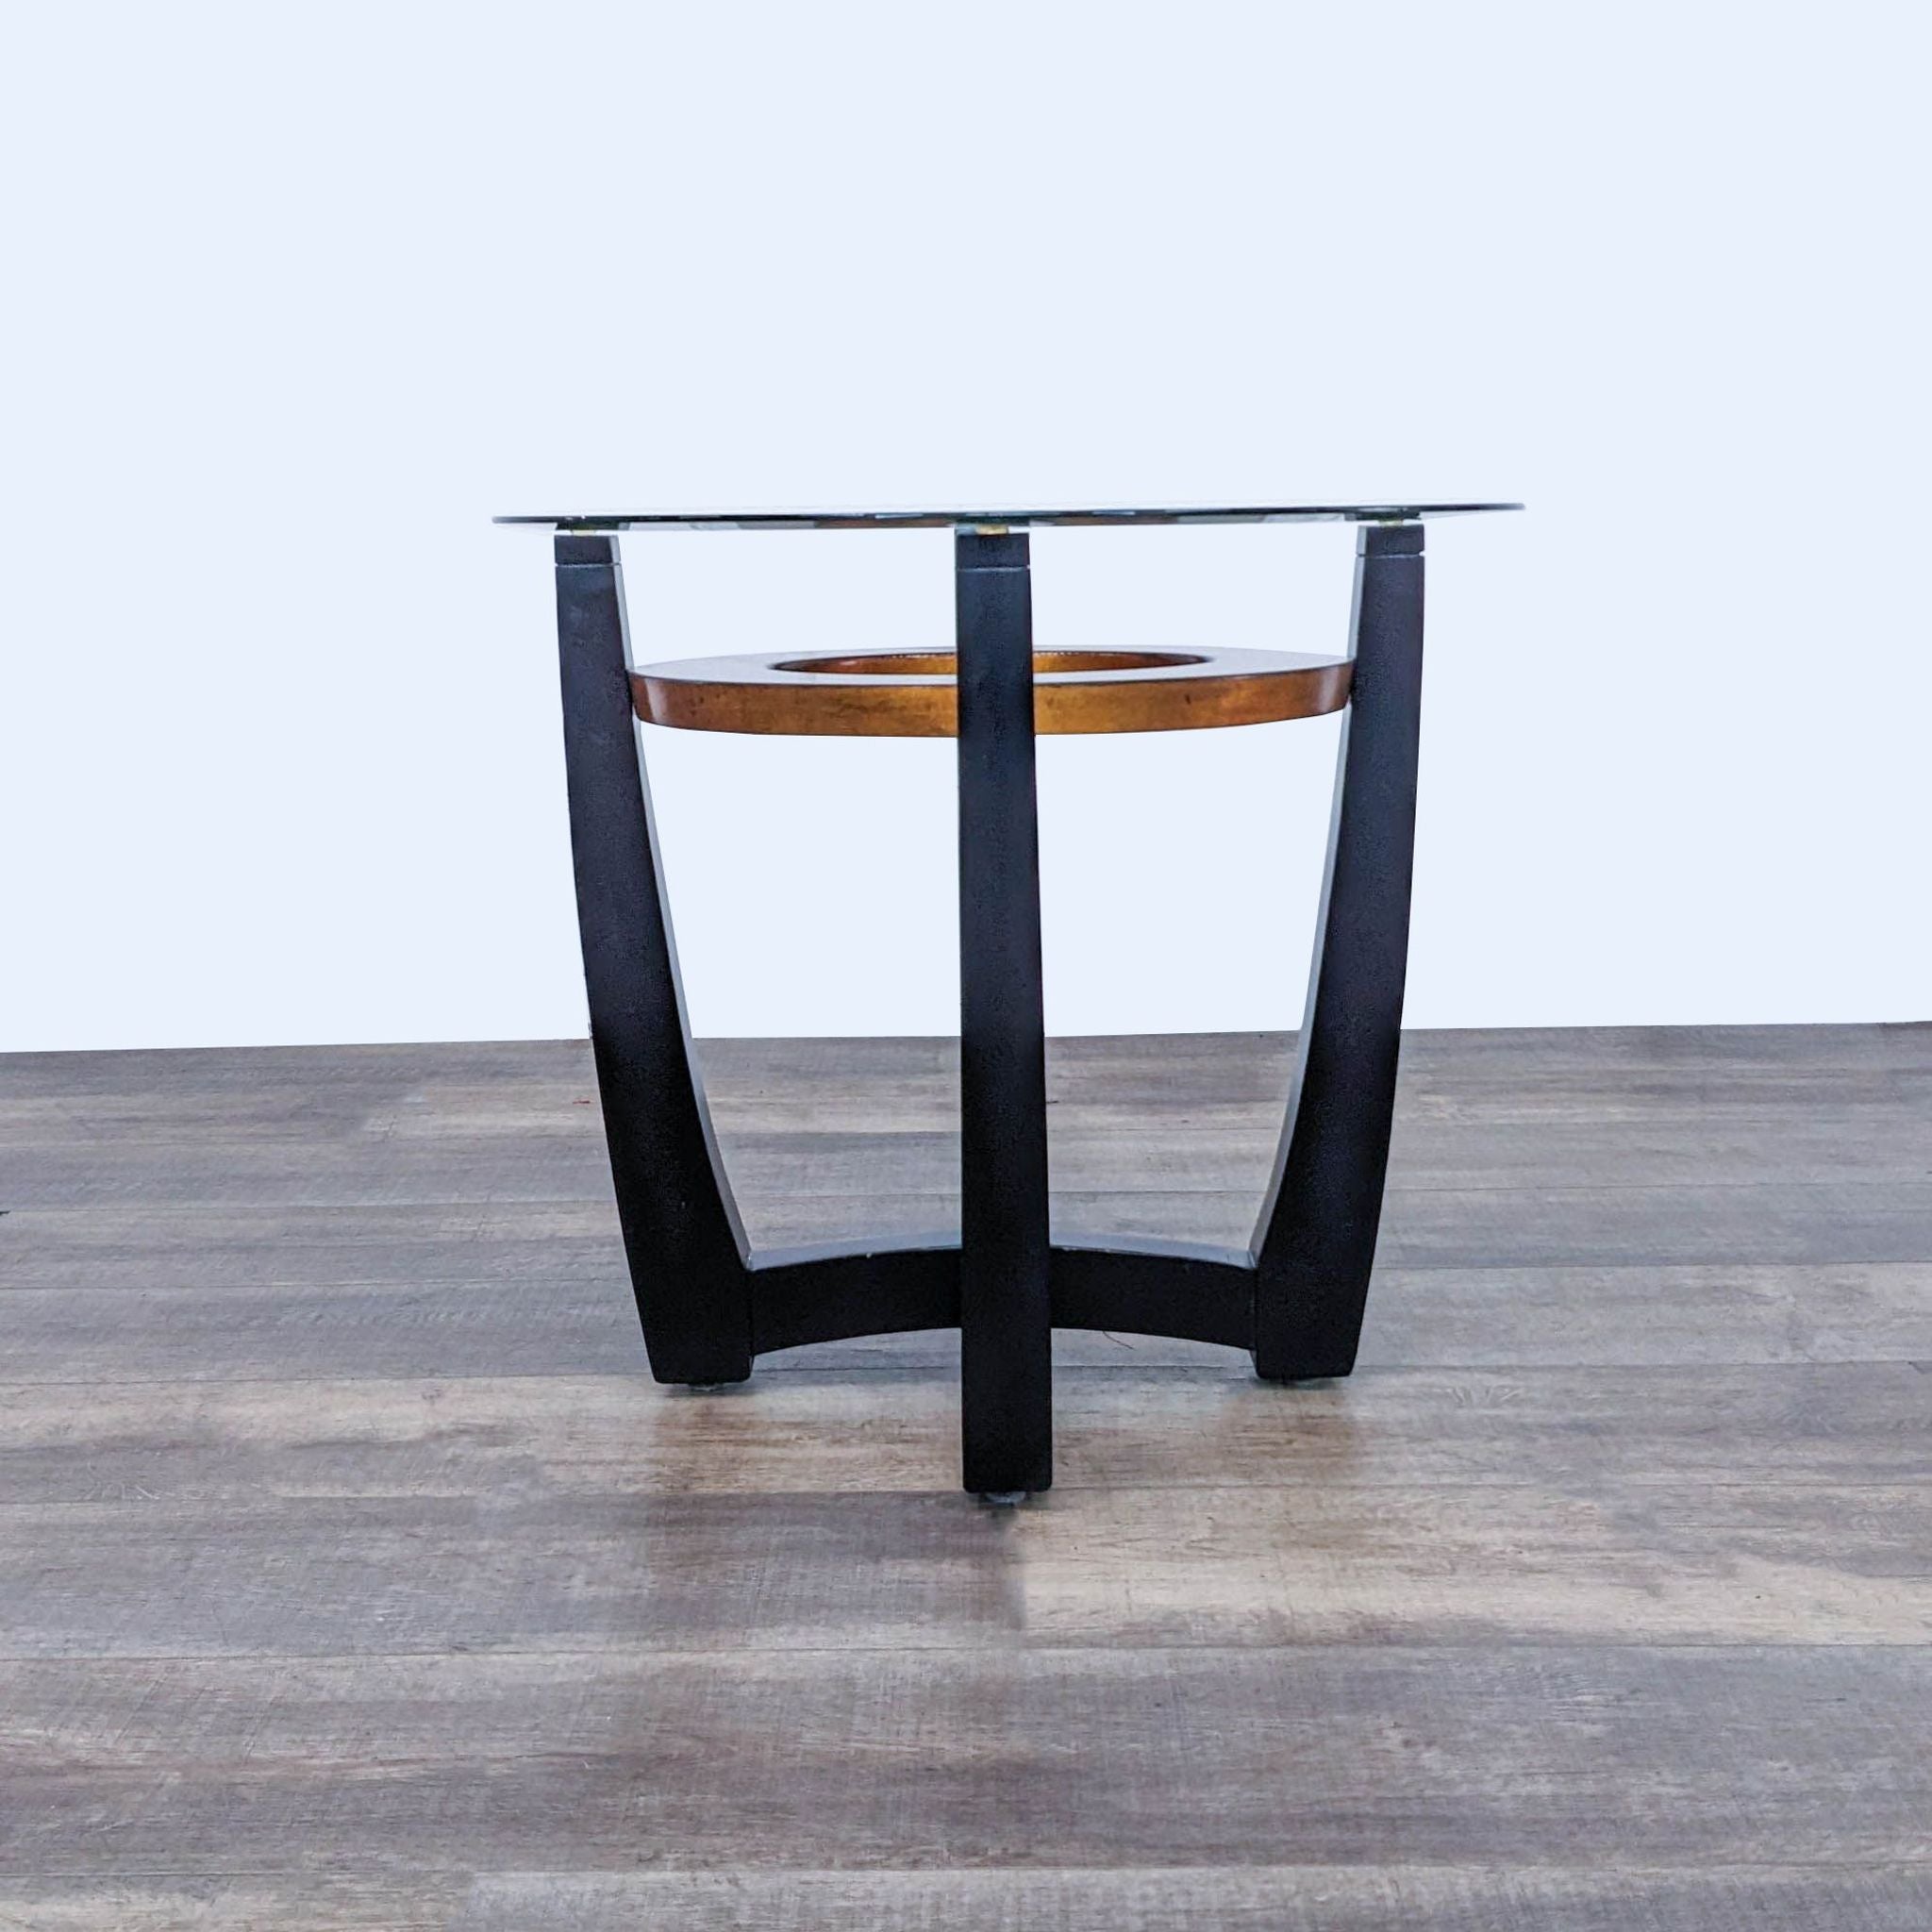 Reperch brand end table with wood base and glass top, set against a white background on a wooden floor.